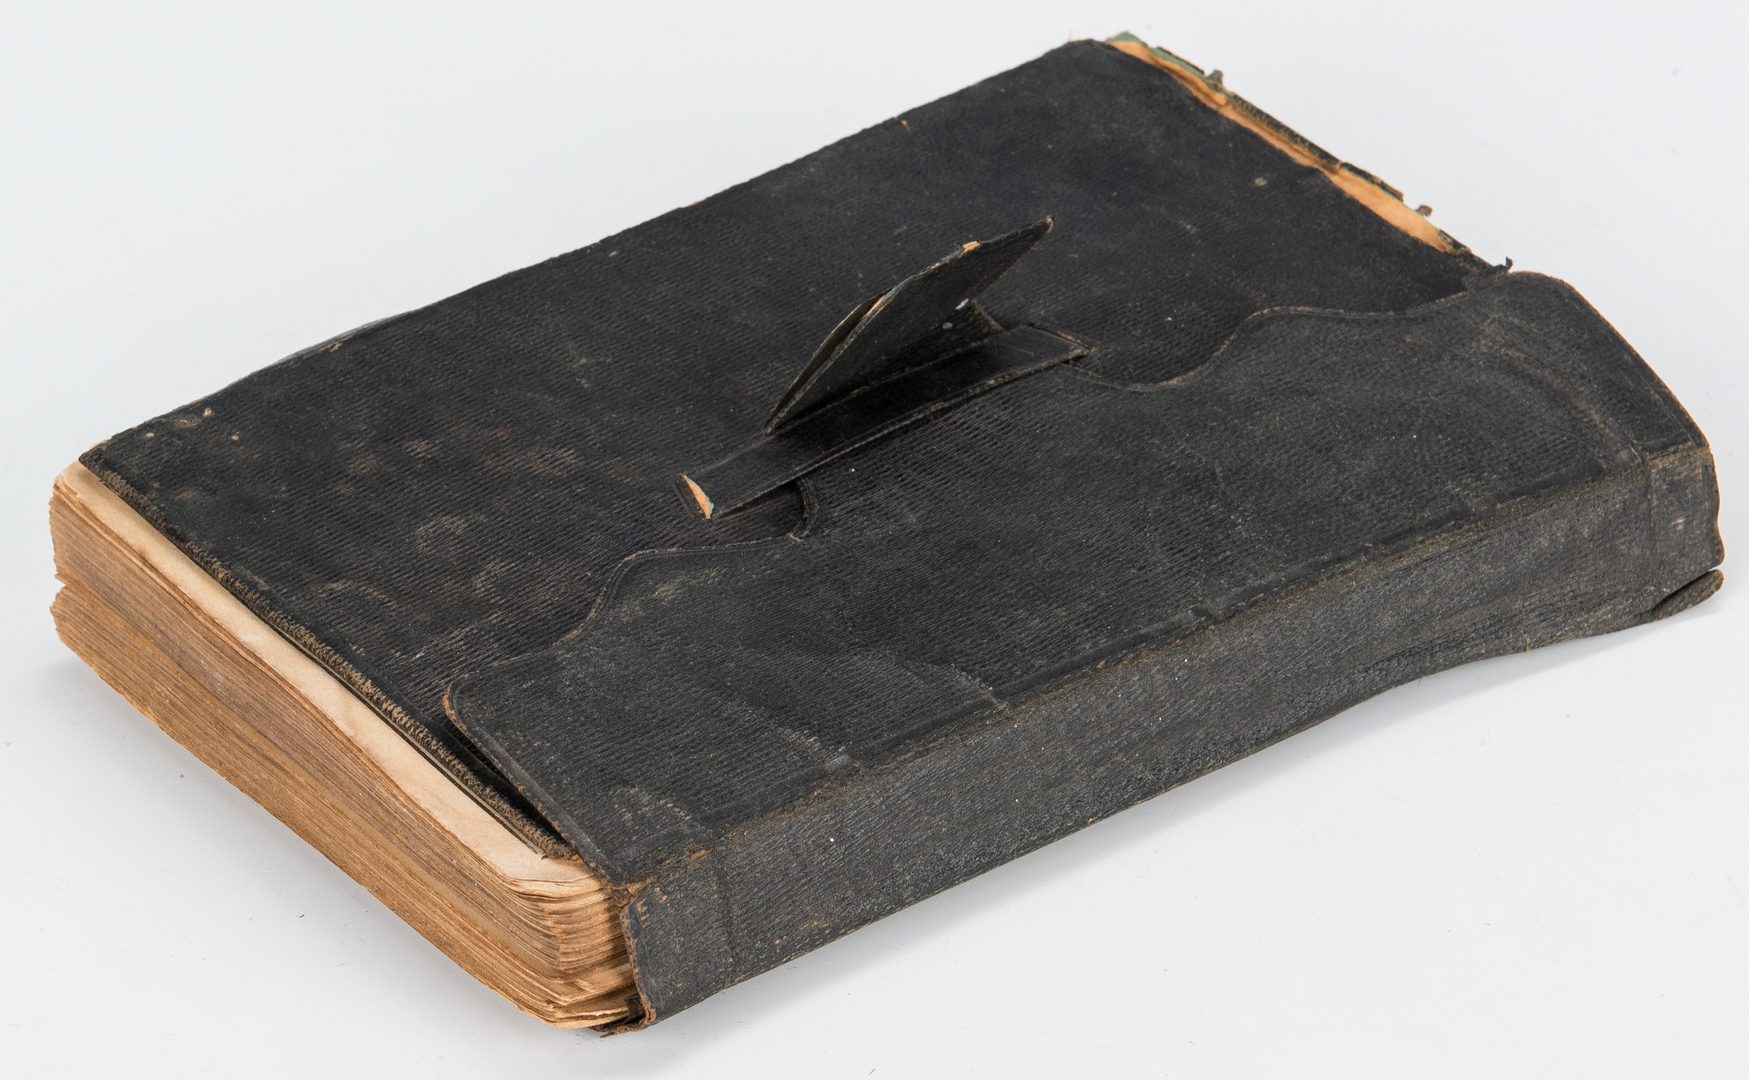 Lot 365: Civil War Archive incl. Soldier Diary, Ewell Signature